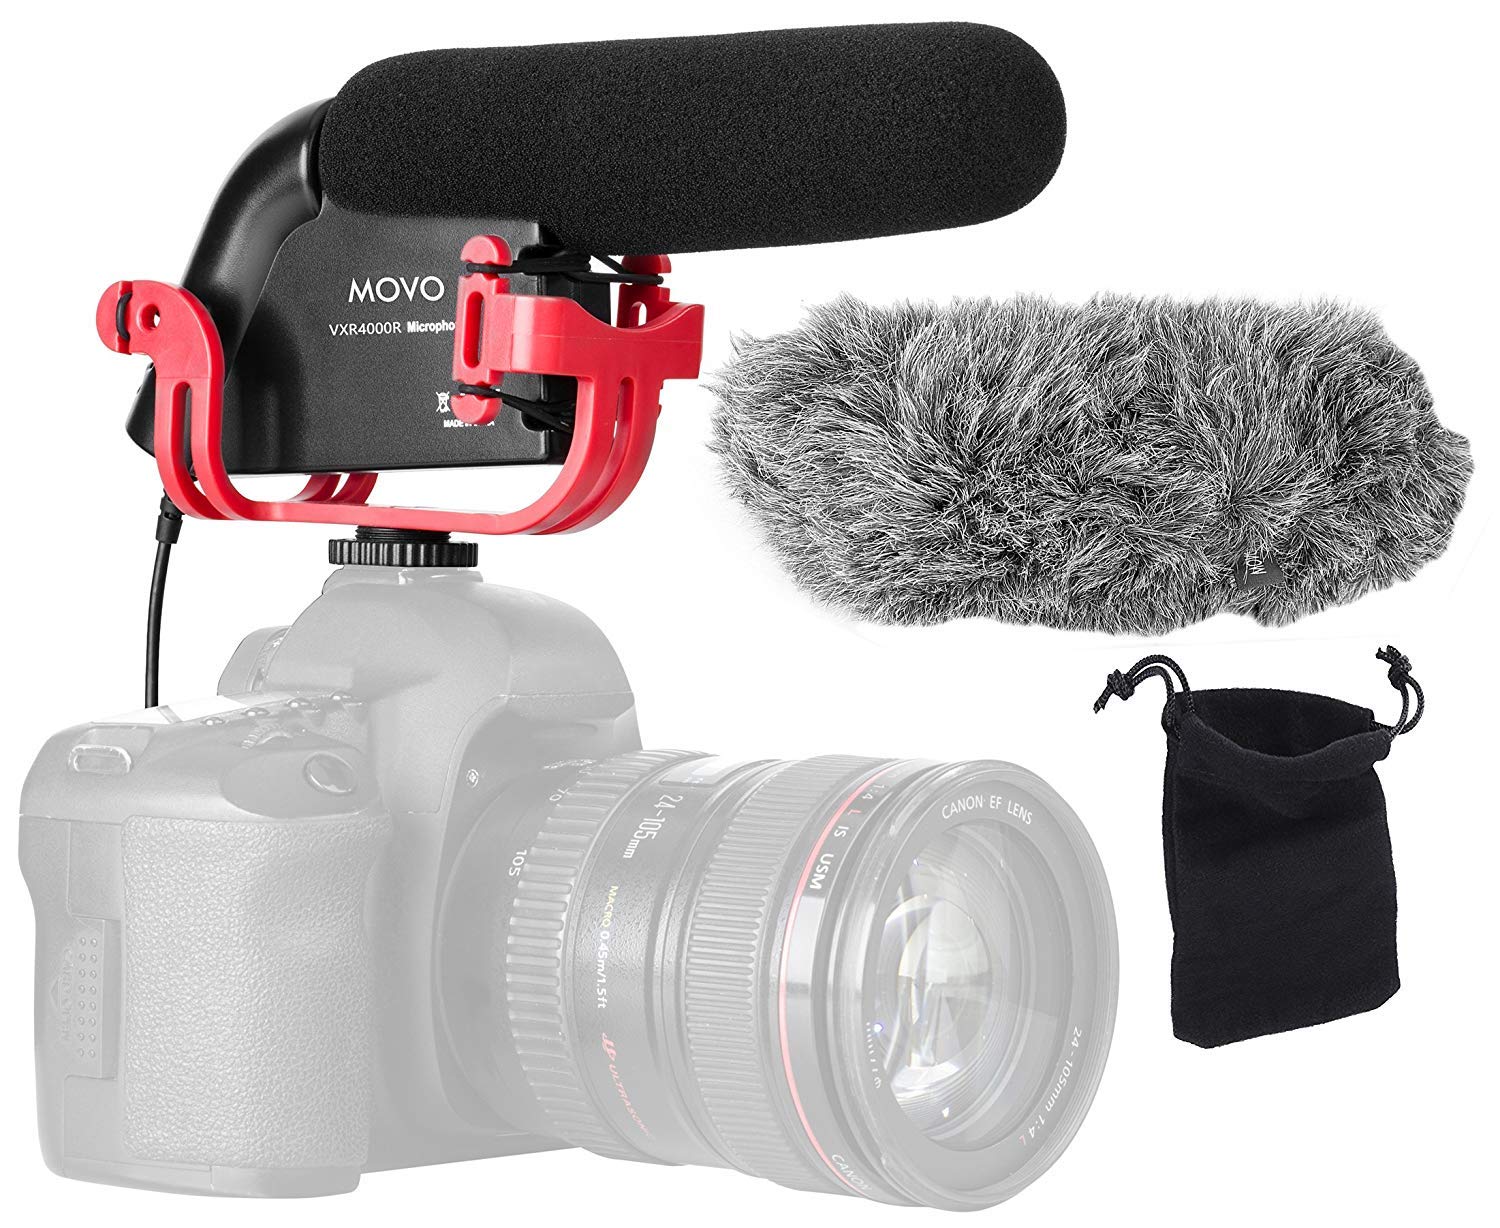 Movo VXR4000R Directional Shotgun Condenser Video Microphone with Shockmount, Low Cut Filter, Foam + Deadcat Windscreens and Carry Case - for DSLR Cameras and Camcorders  - Like New